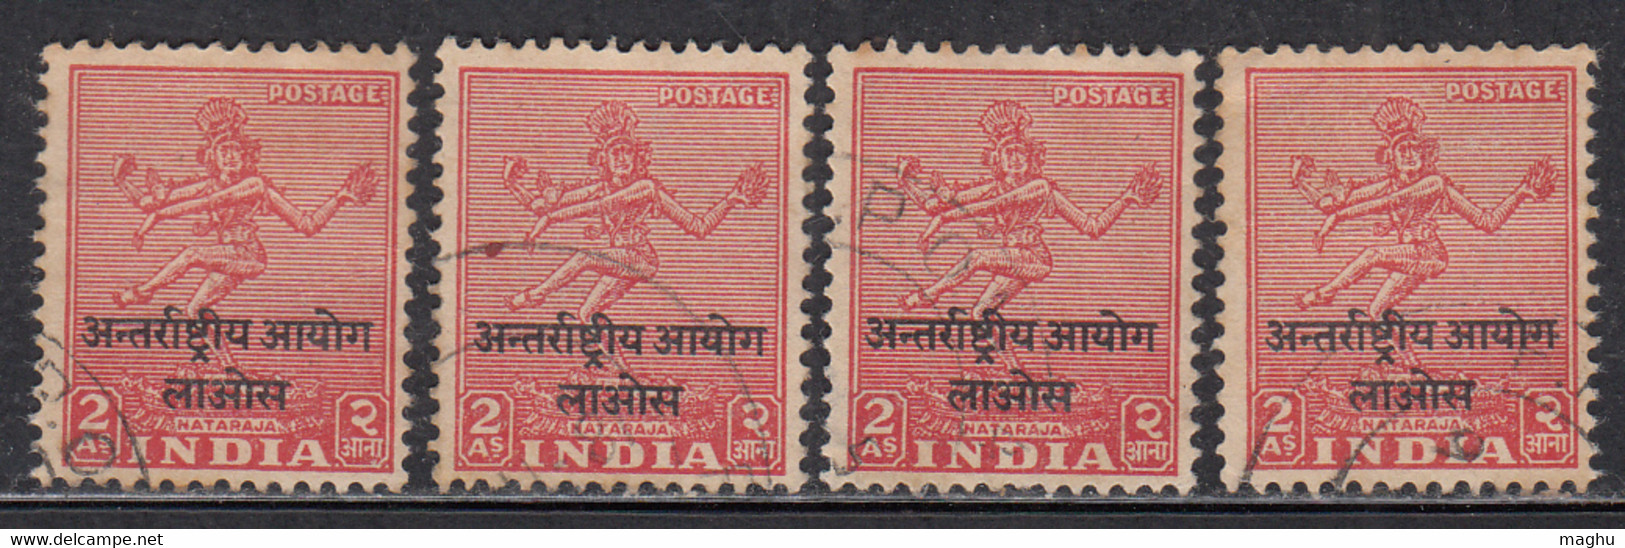 2a X 4, Laos, India Used Ovpt, Archeological Series, Military, Nararaja Dance, Hinduism, 1954 Indo- China - Military Service Stamp